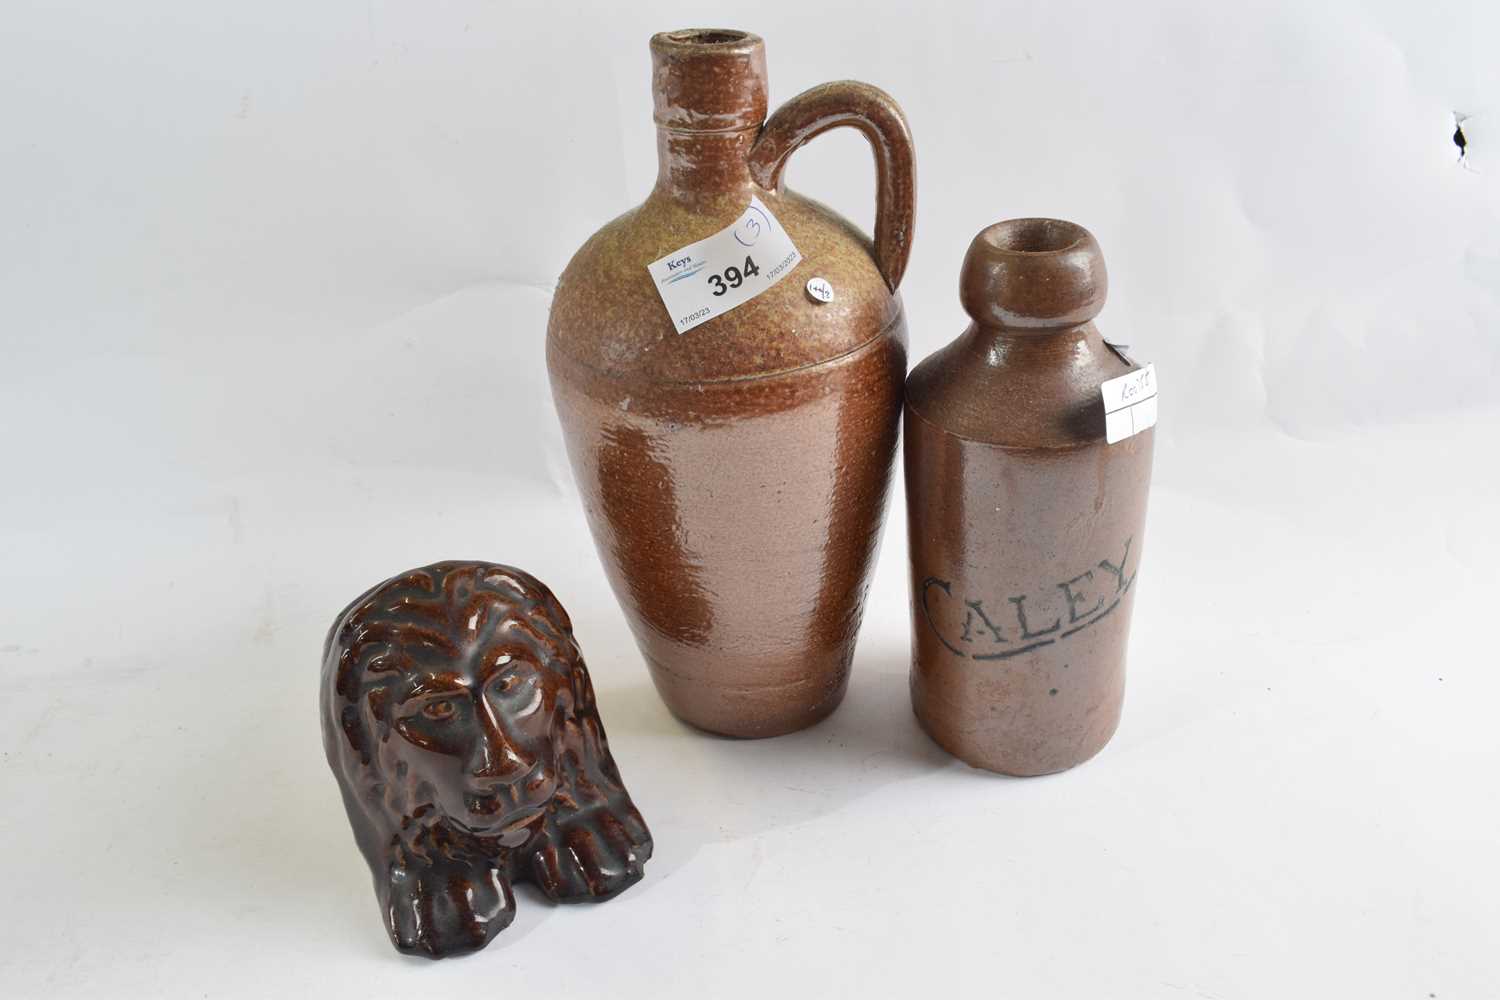 A ginger beer bottle Bourne Denby marked Caley together with a stoneware flask and a treacle